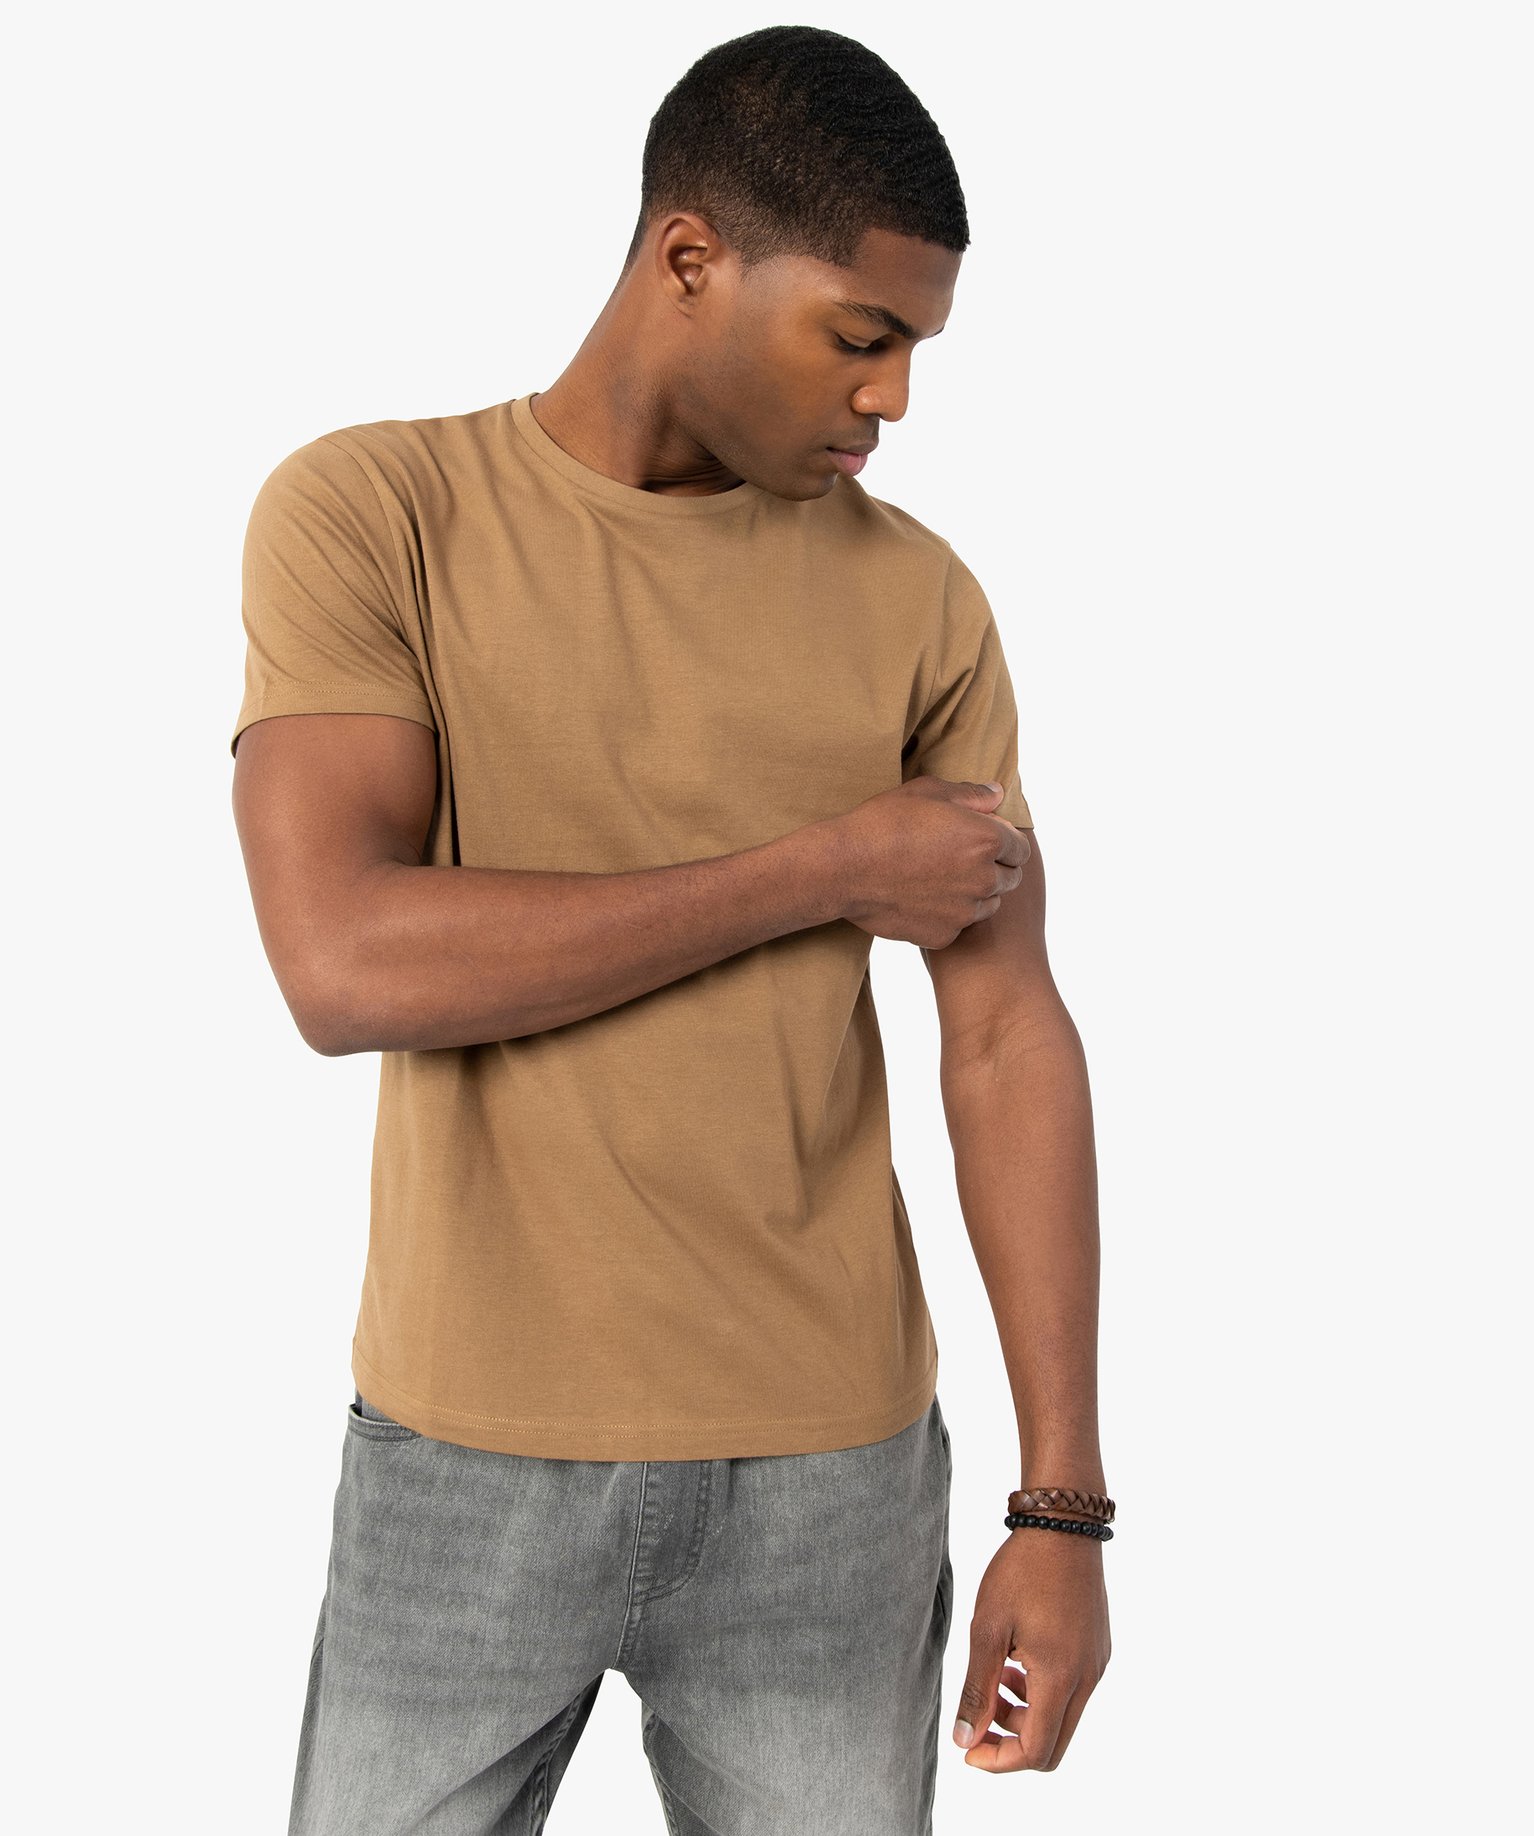 tee-shirt homme a manches courtes et col rond brun tee-shirts